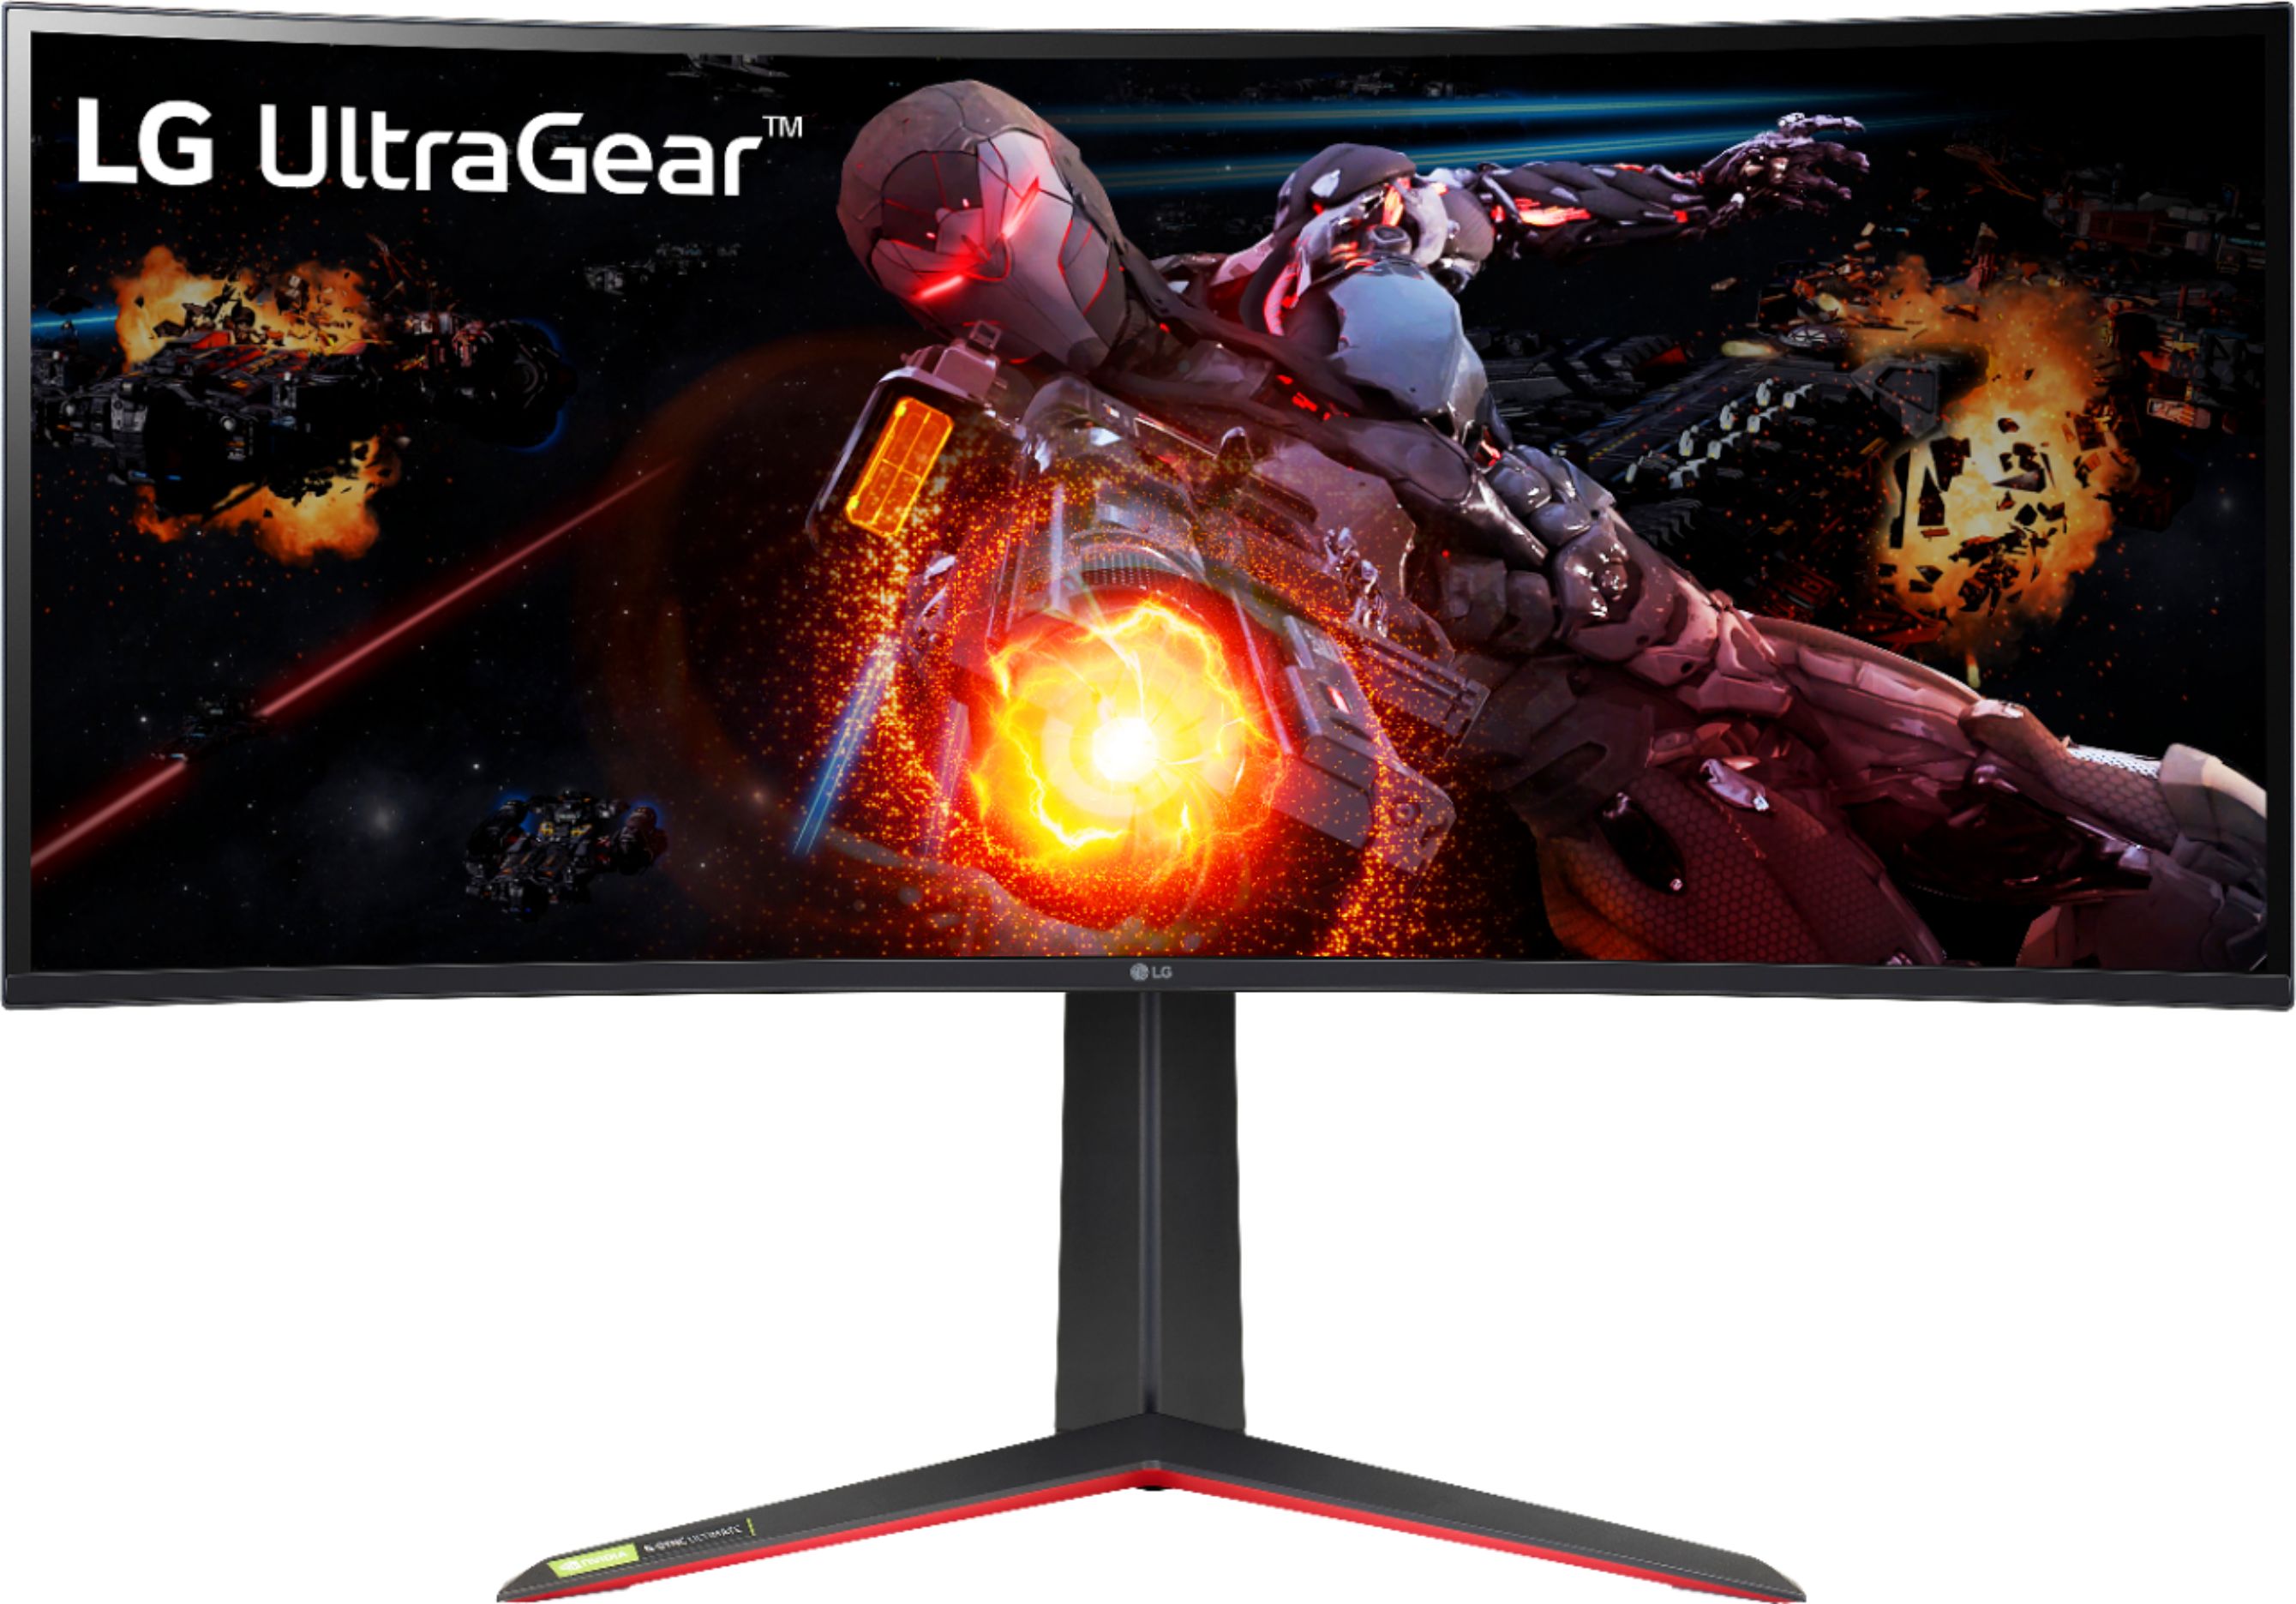 Photo 1 of LG 34GP950G-B 34 Inch Ultragear QHD (3440 x 1440) Nano IPS Curved Gaming Monitor with 1ms Response Time and 144HZ Refresh Rate and NVIDIA G-SYNC Ultimate with Tilt/Height Adjustable Stand - Black
